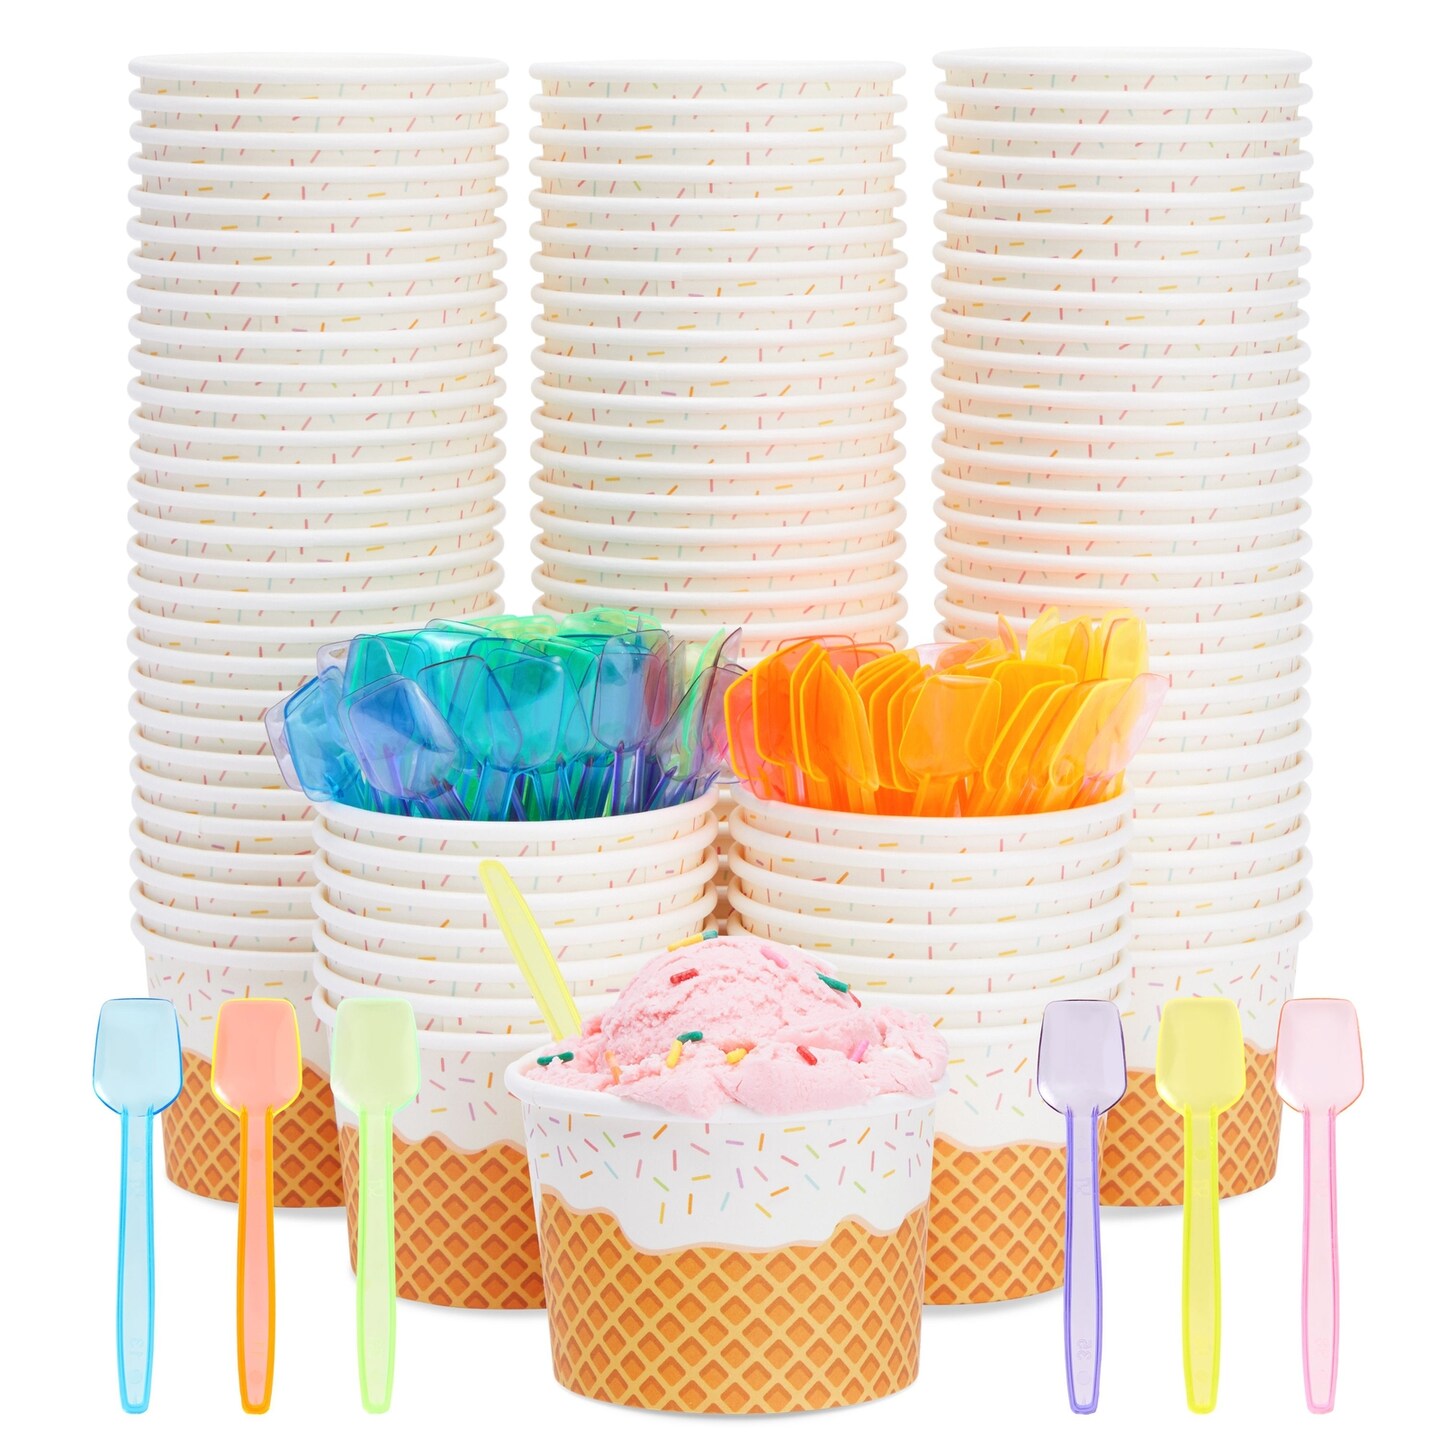 100 Pack Ice Cream Cups with Spoons, Disposable Dessert Bowls for Sundae Bar, Frozen Yogurt (8 oz)